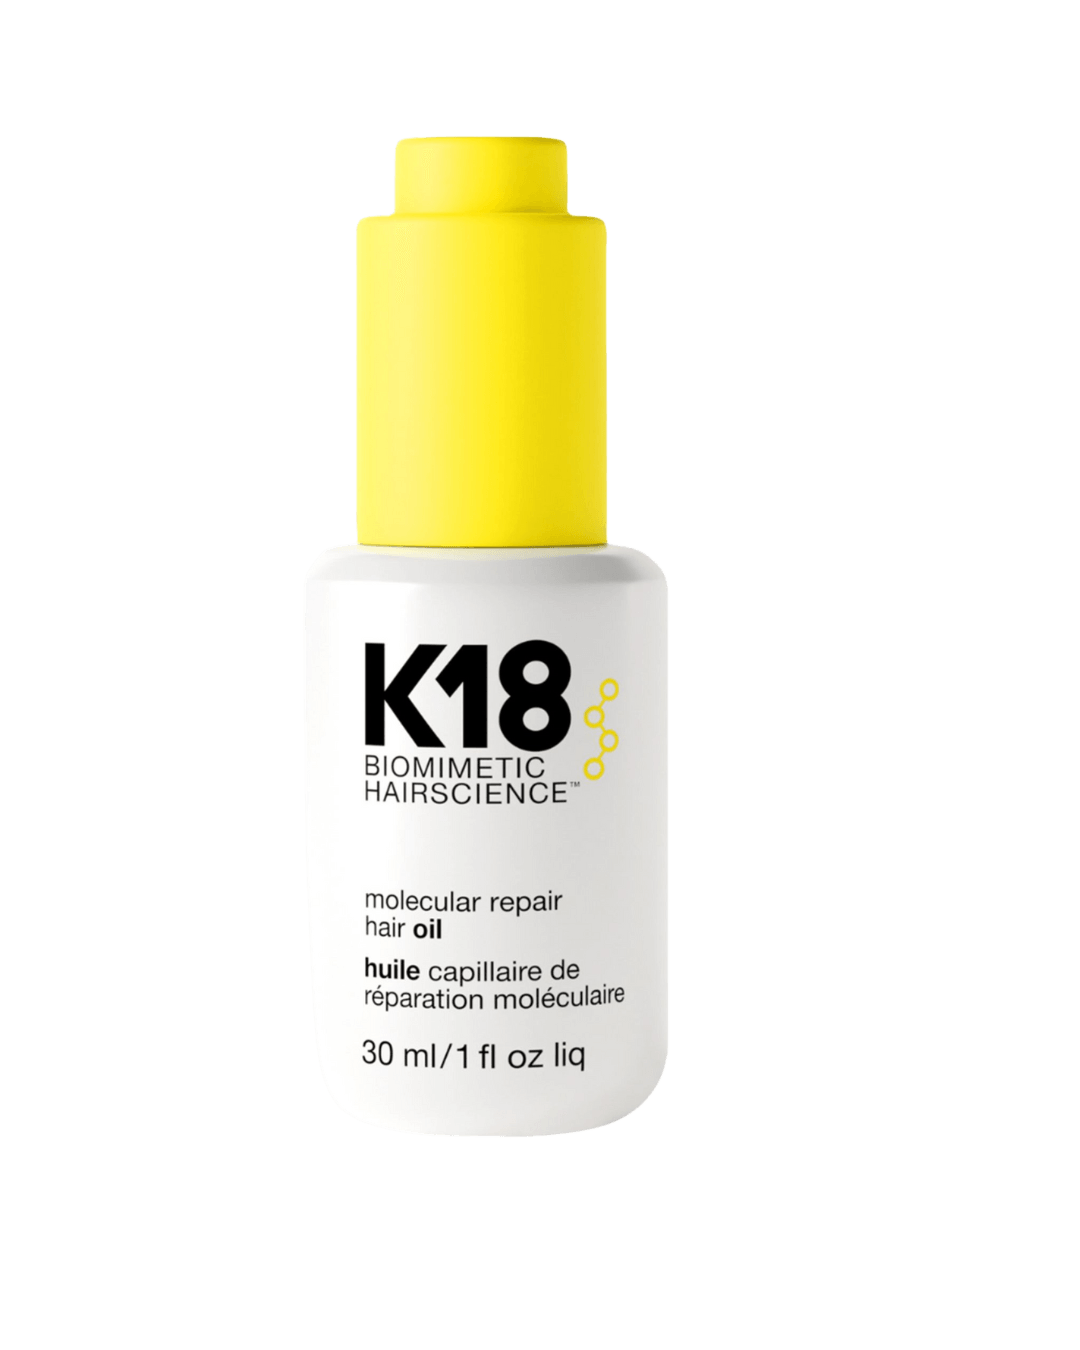 Daily Vanity Beauty Awards 2024 Best Hair care K18 Molecular Repair Hair Oil Voted By Beauty Experts